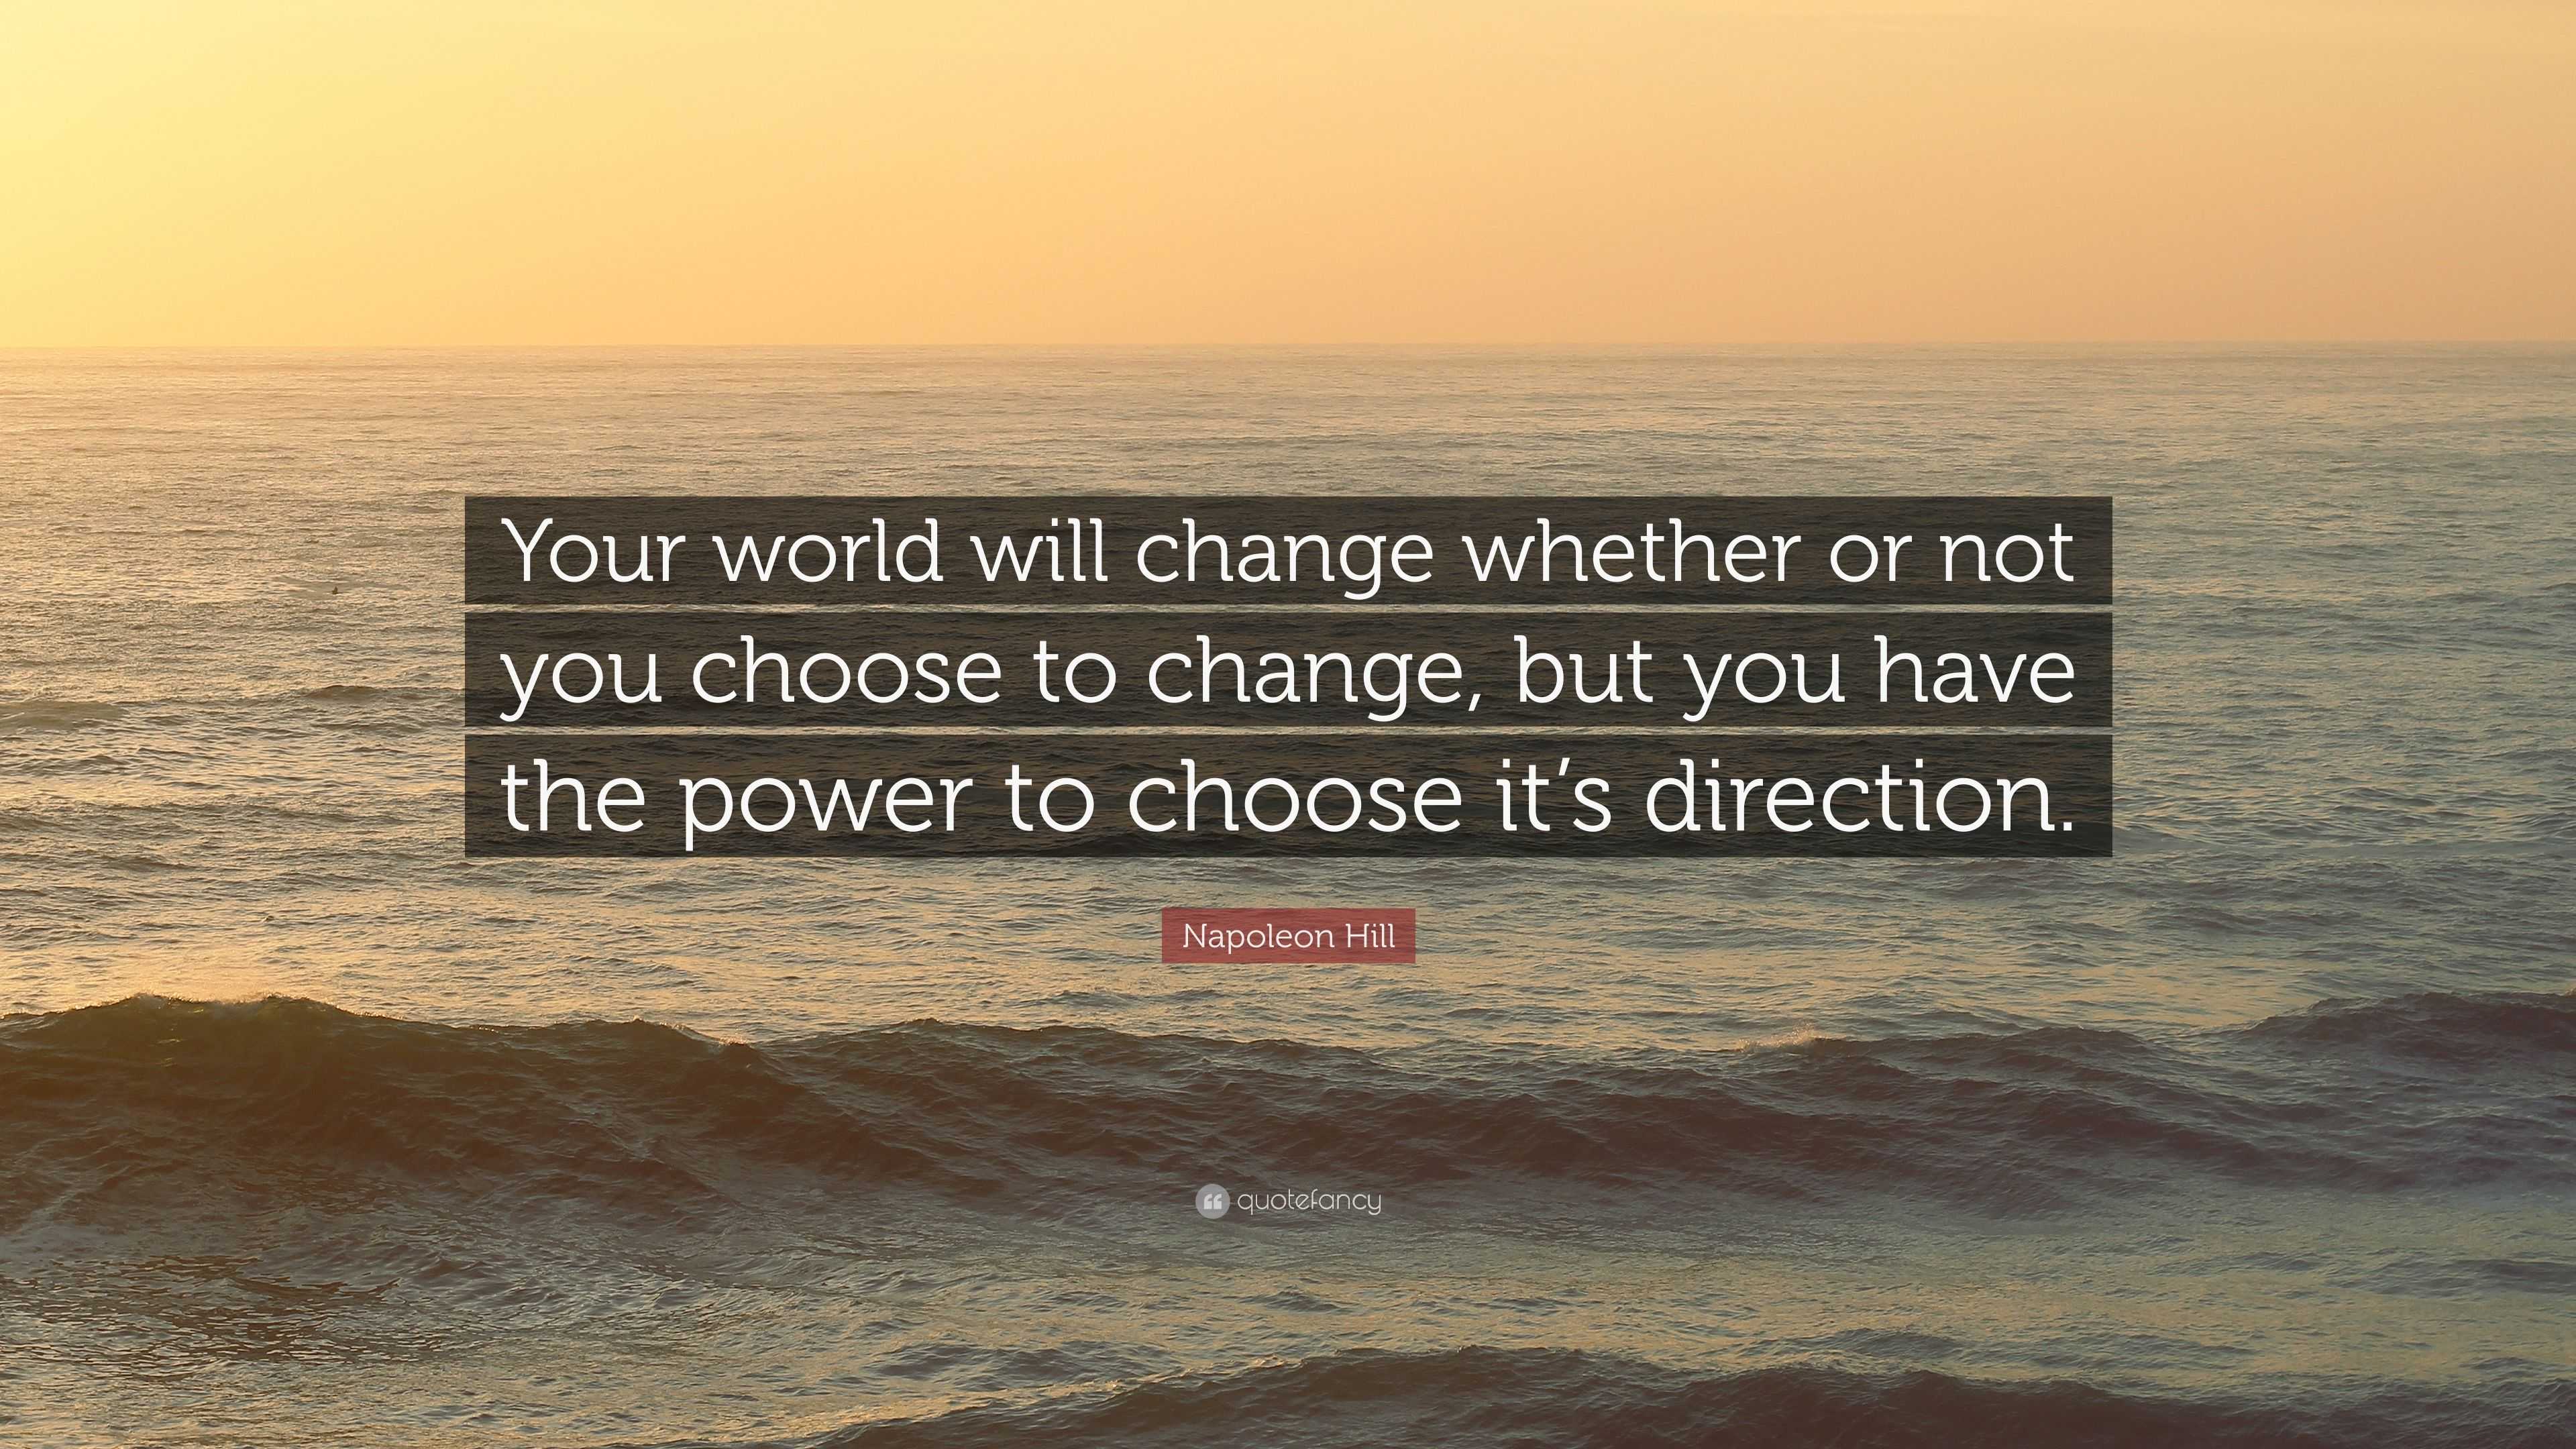 Napoleon Hill Quote “Your world will change whether or